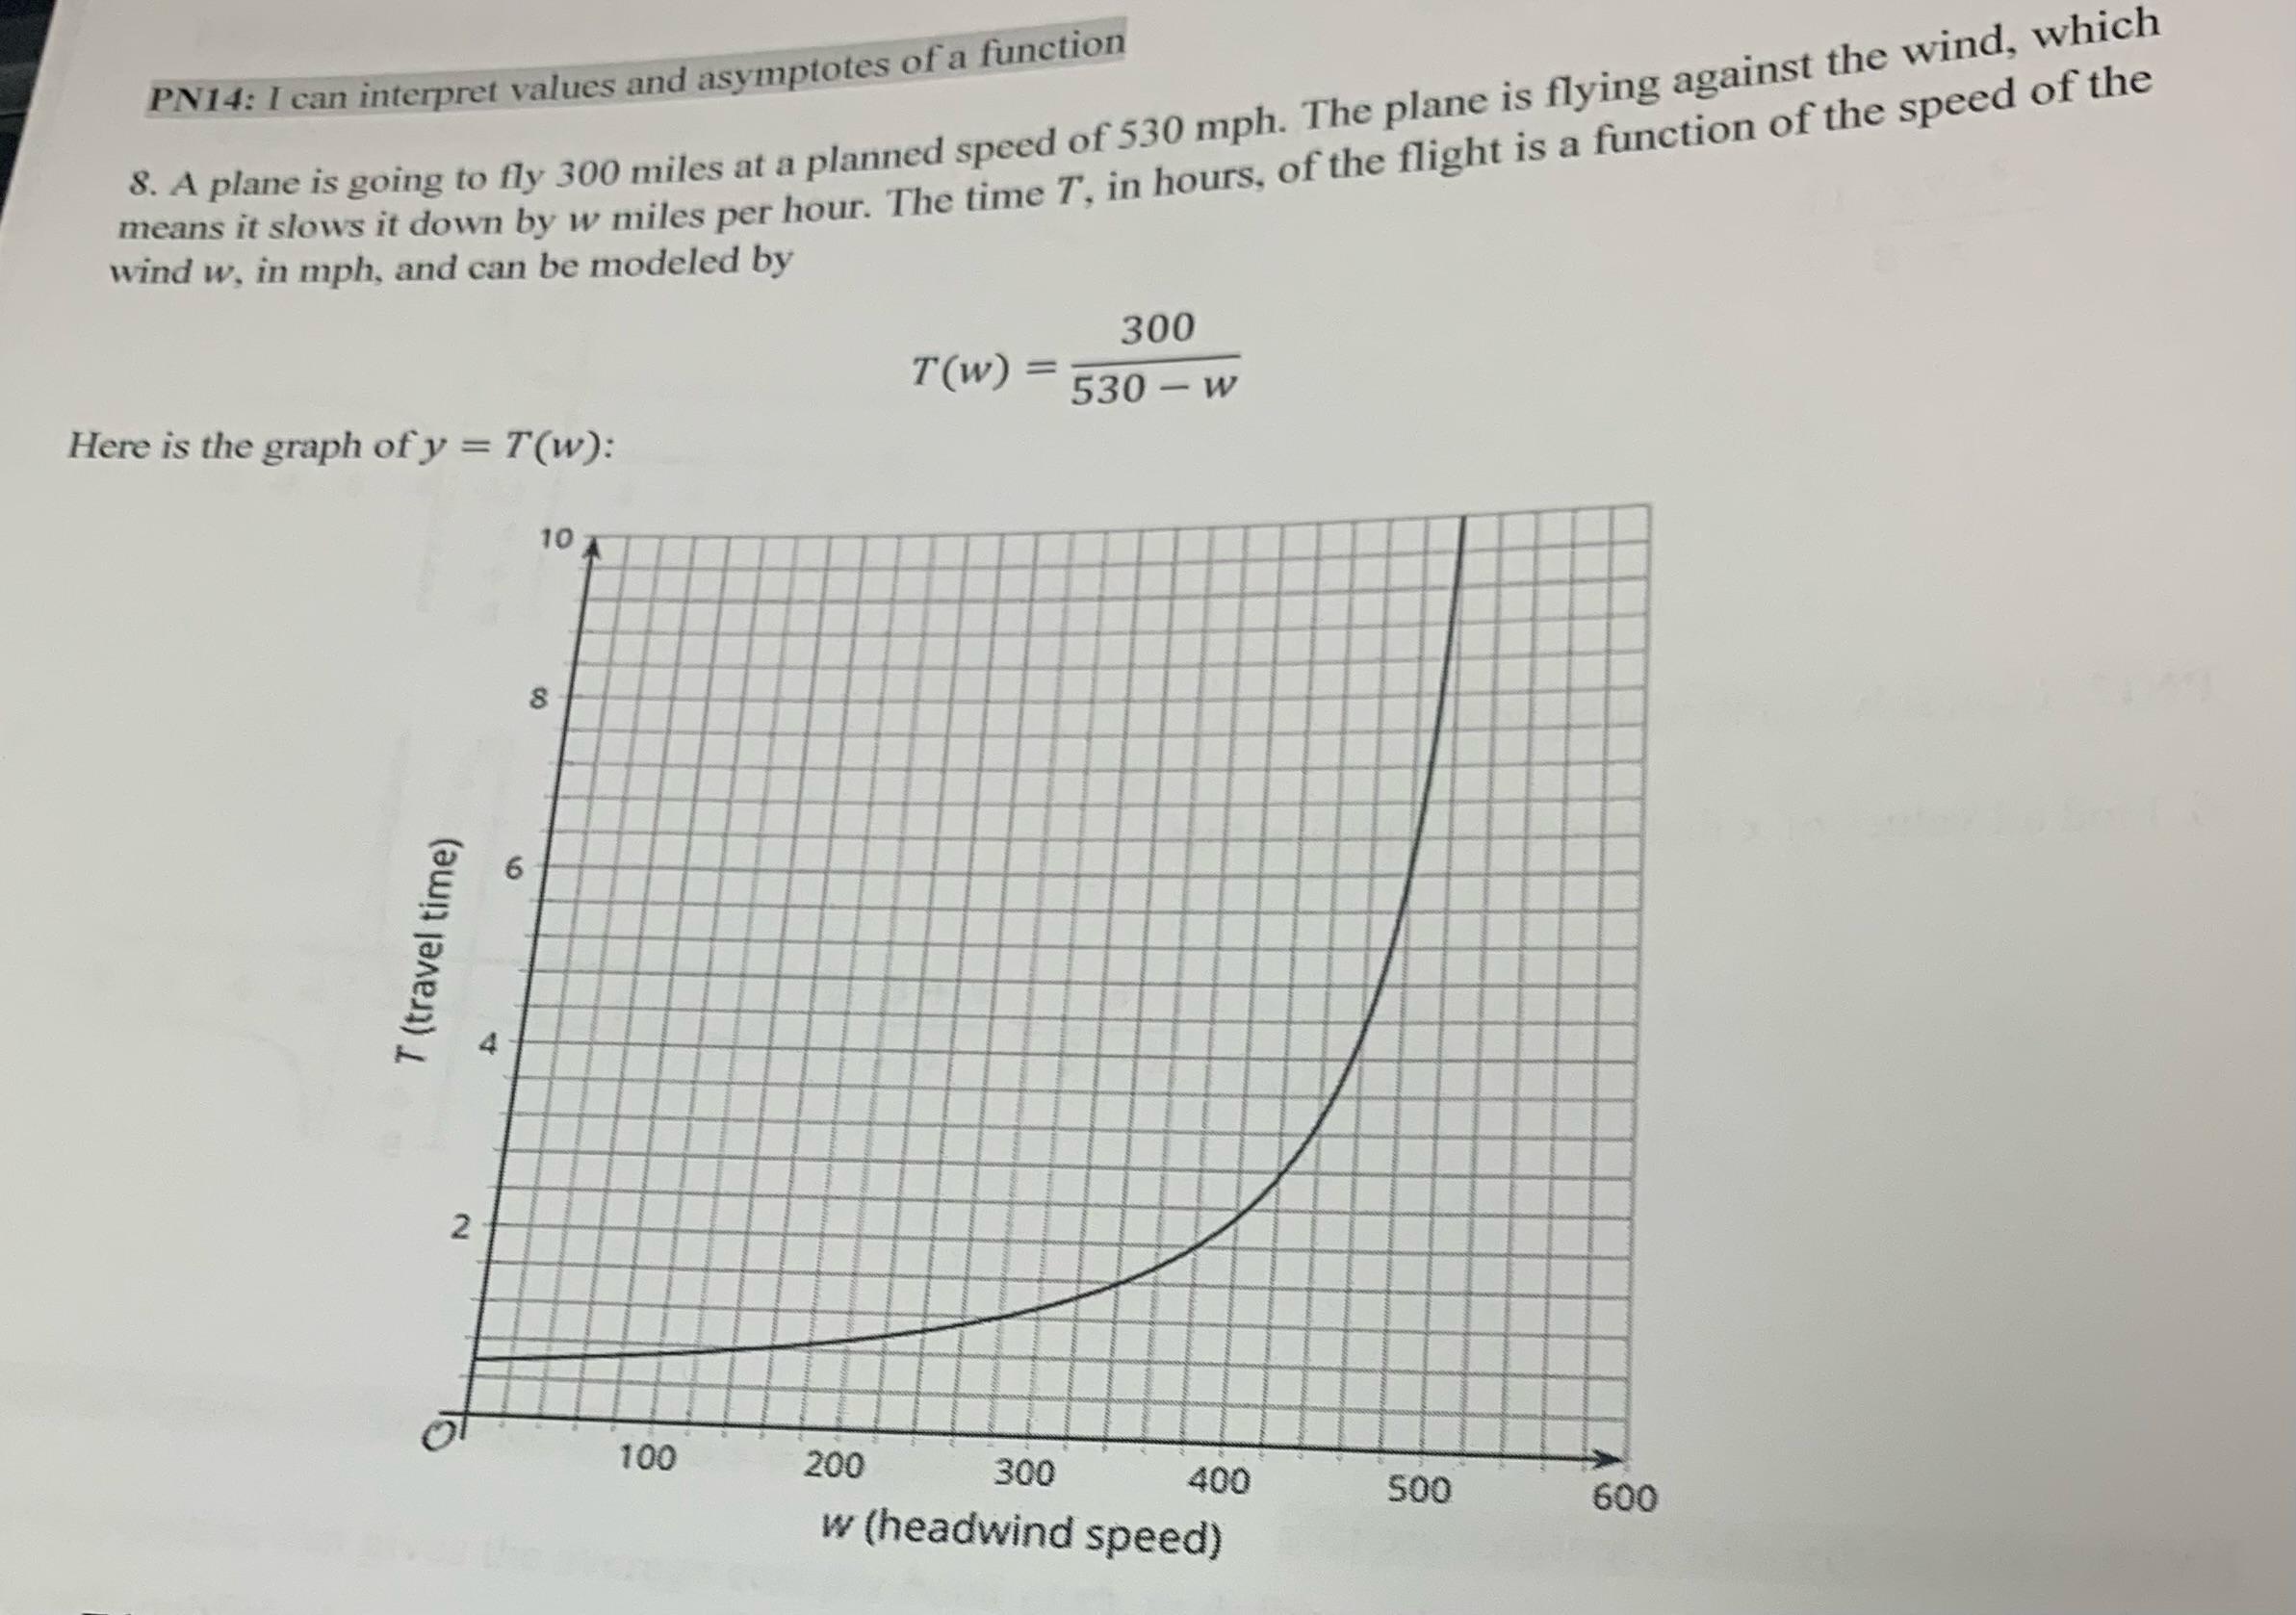 At What Value Of W Does The Graph Have A Vertical Asymptote? Explain How You Know And What This Asymptote